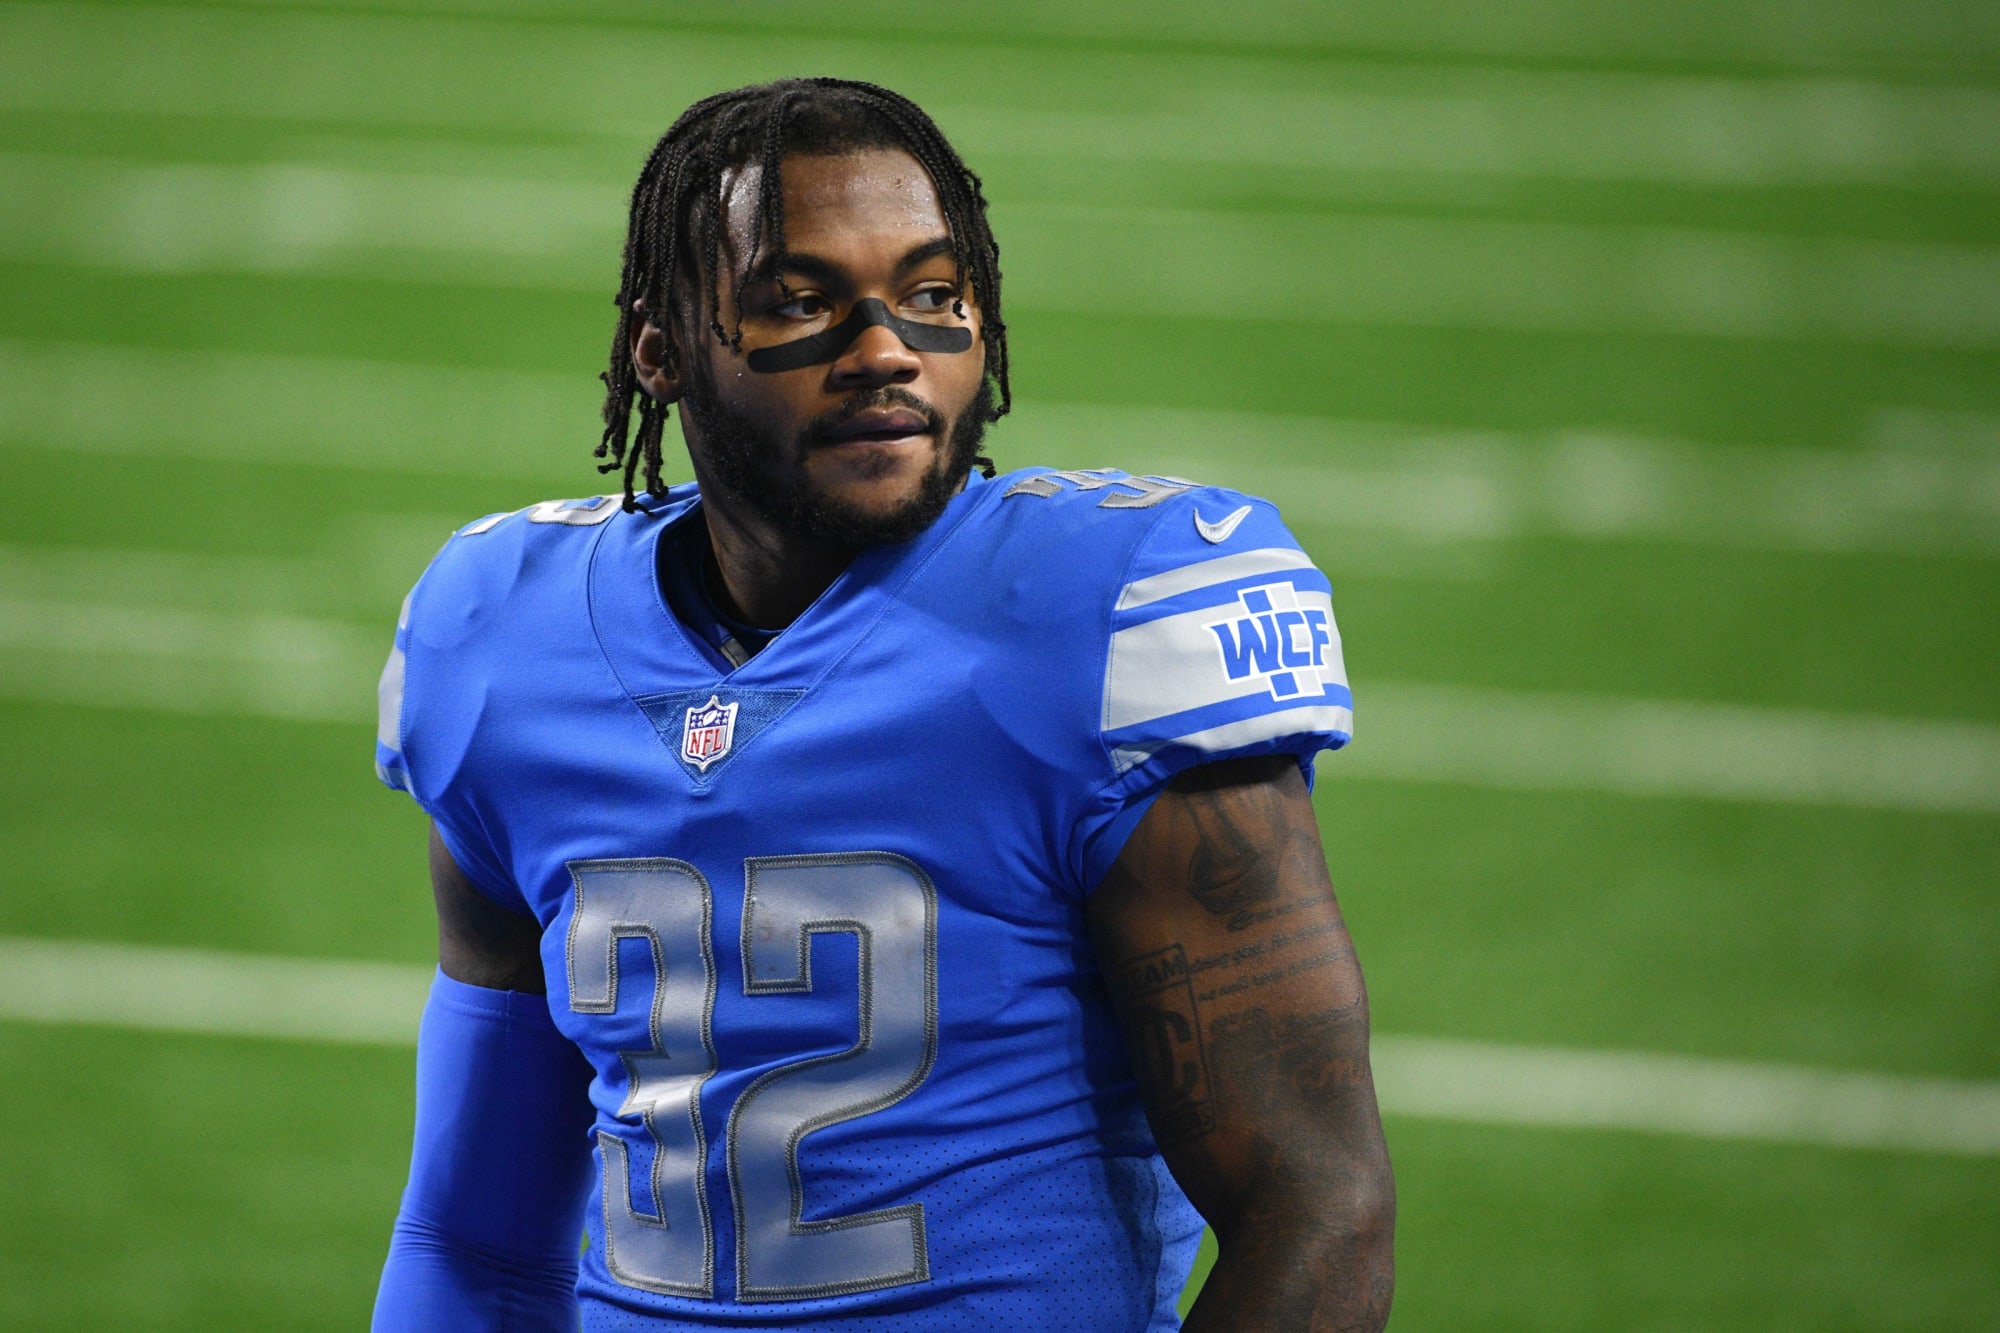 Detroit Lions need to proceed with caution regarding D'Andre Swift